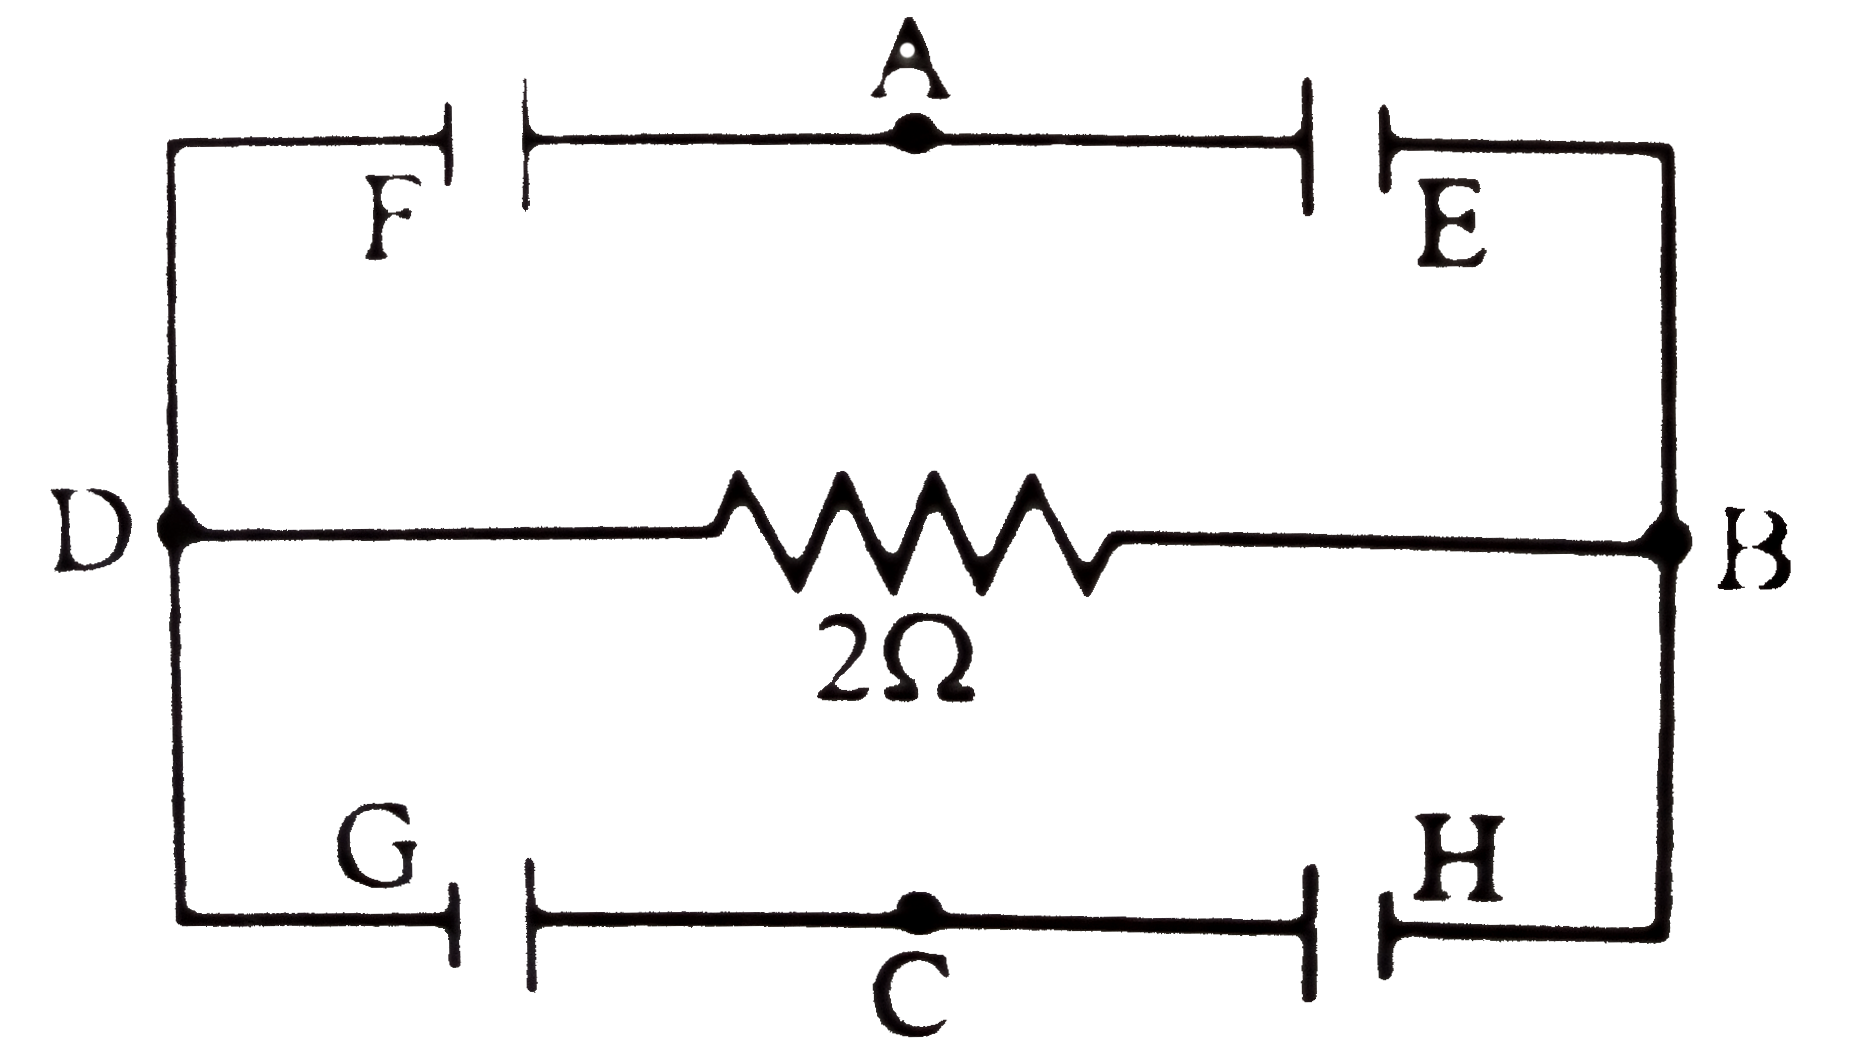 In the circuit shown E, F, G and H are cells of emf 2V, 1V, 3V and 1V respectively and their internal resistance are 2Omega, 1Omega, 3Omega and 1Omega respectively.